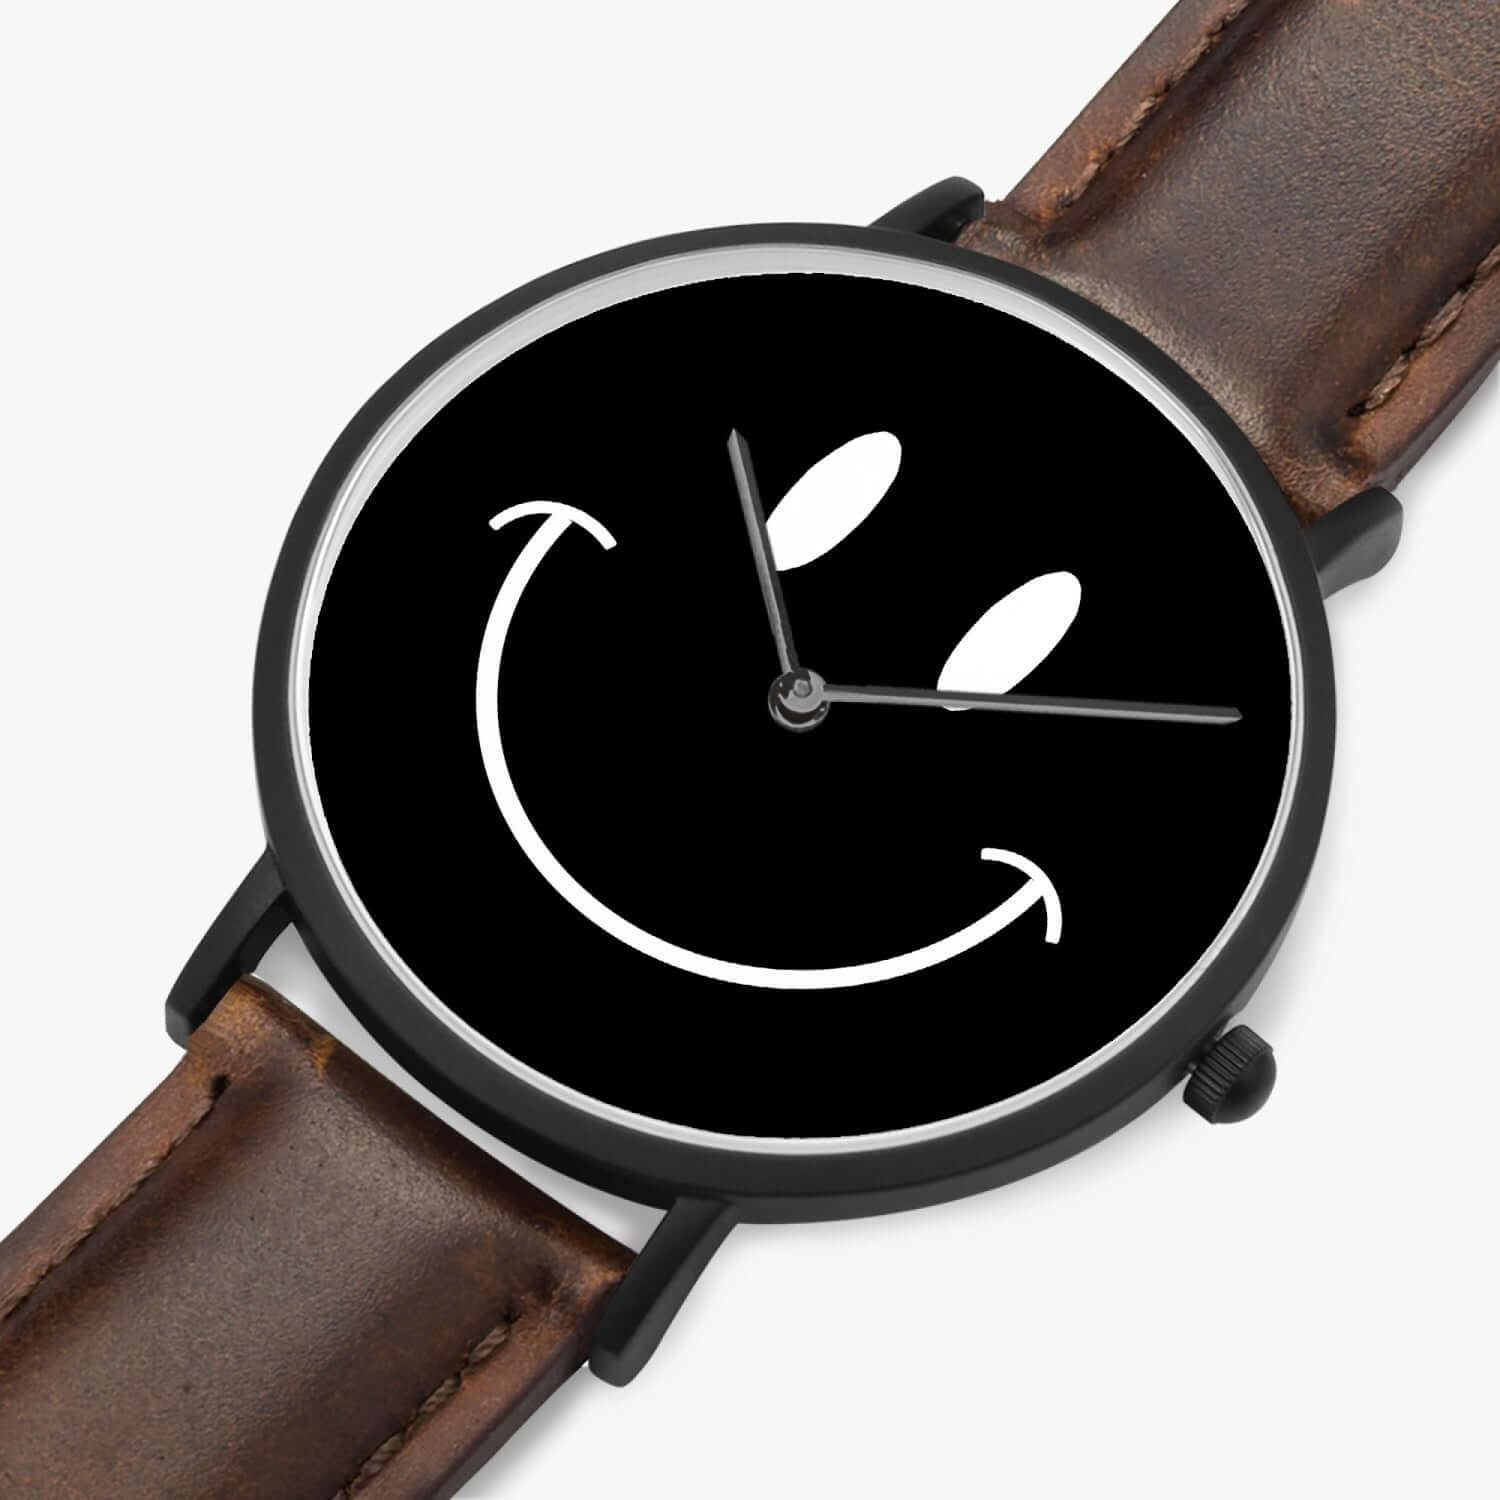 Be Happy Black Smiley Face Ultra-Thin Leather Strap Quartz Watch - The Kindness Cause